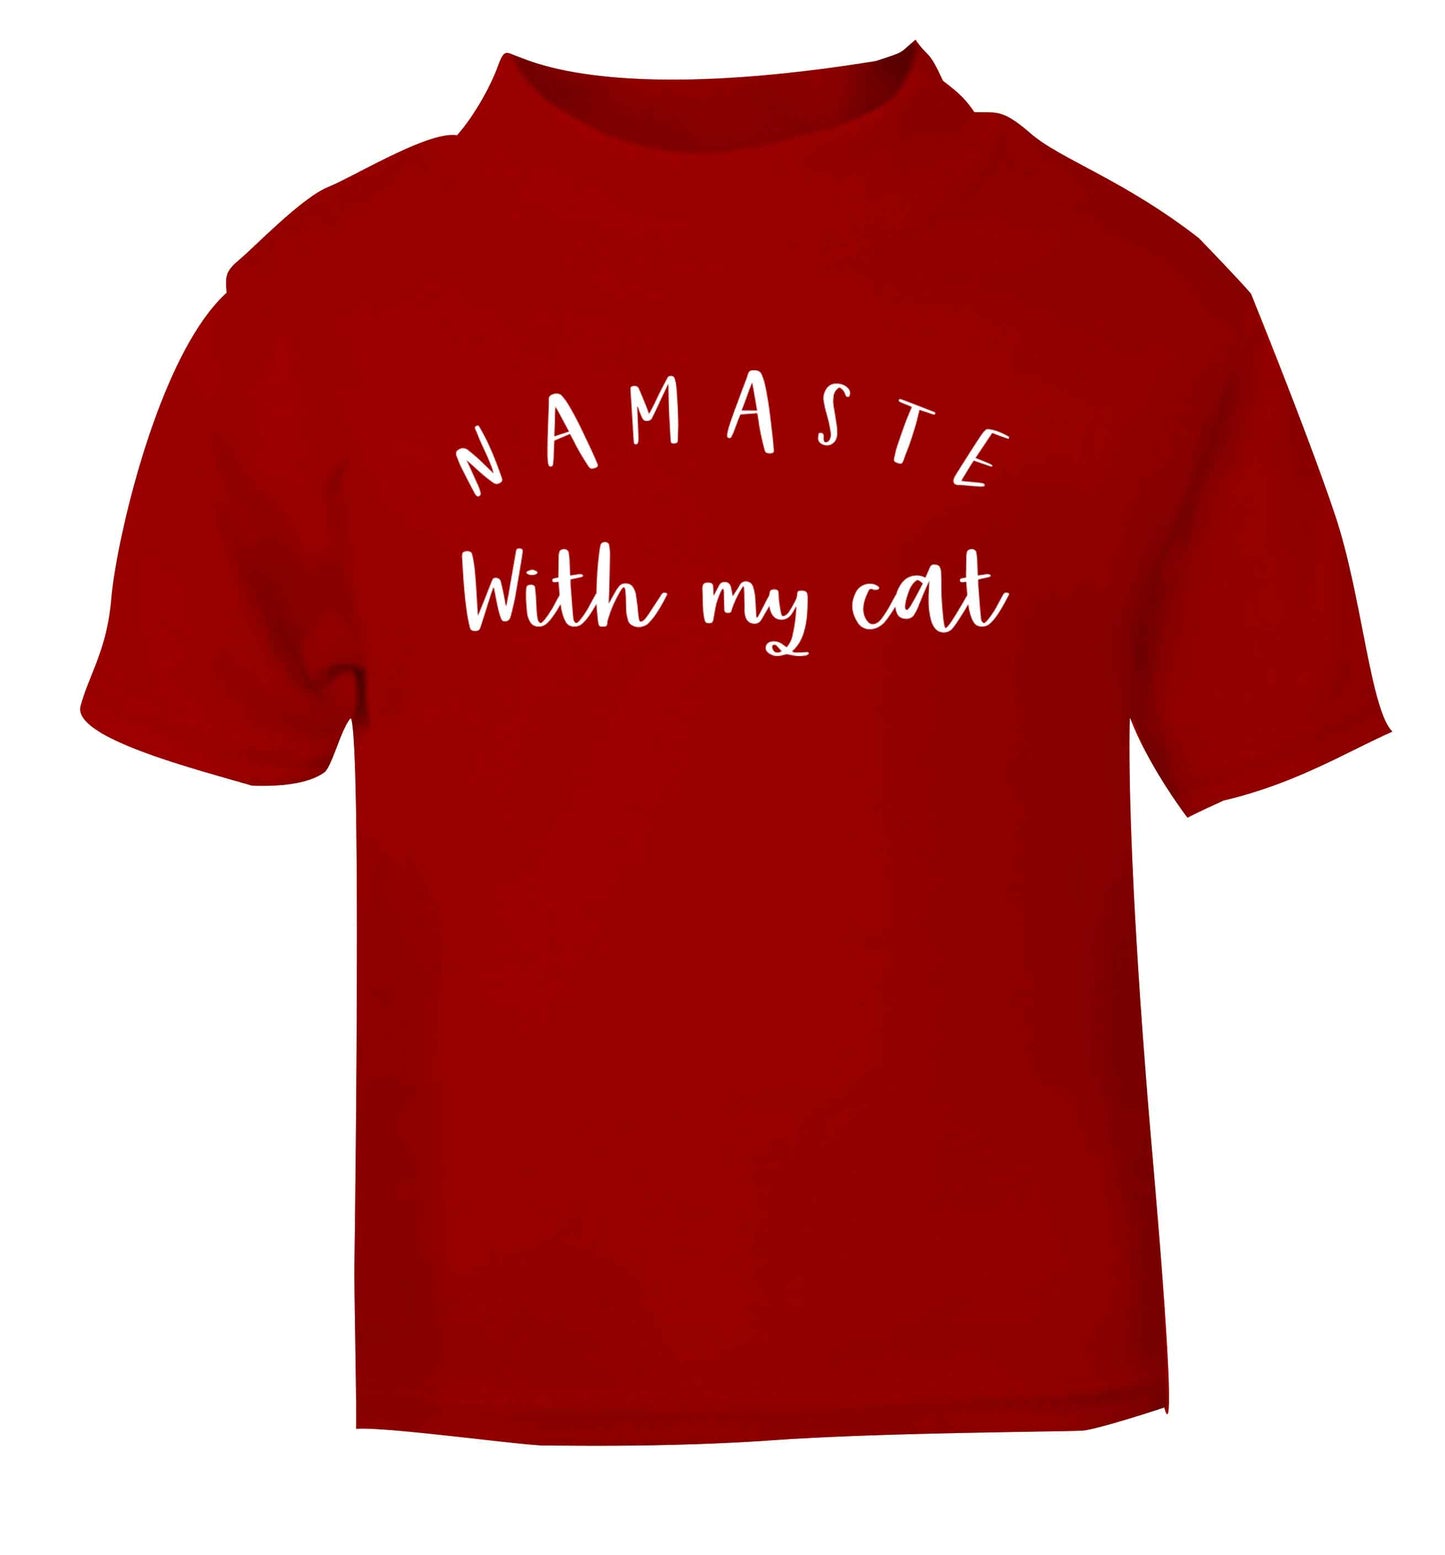 Namaste with my cat red Baby Toddler Tshirt 2 Years